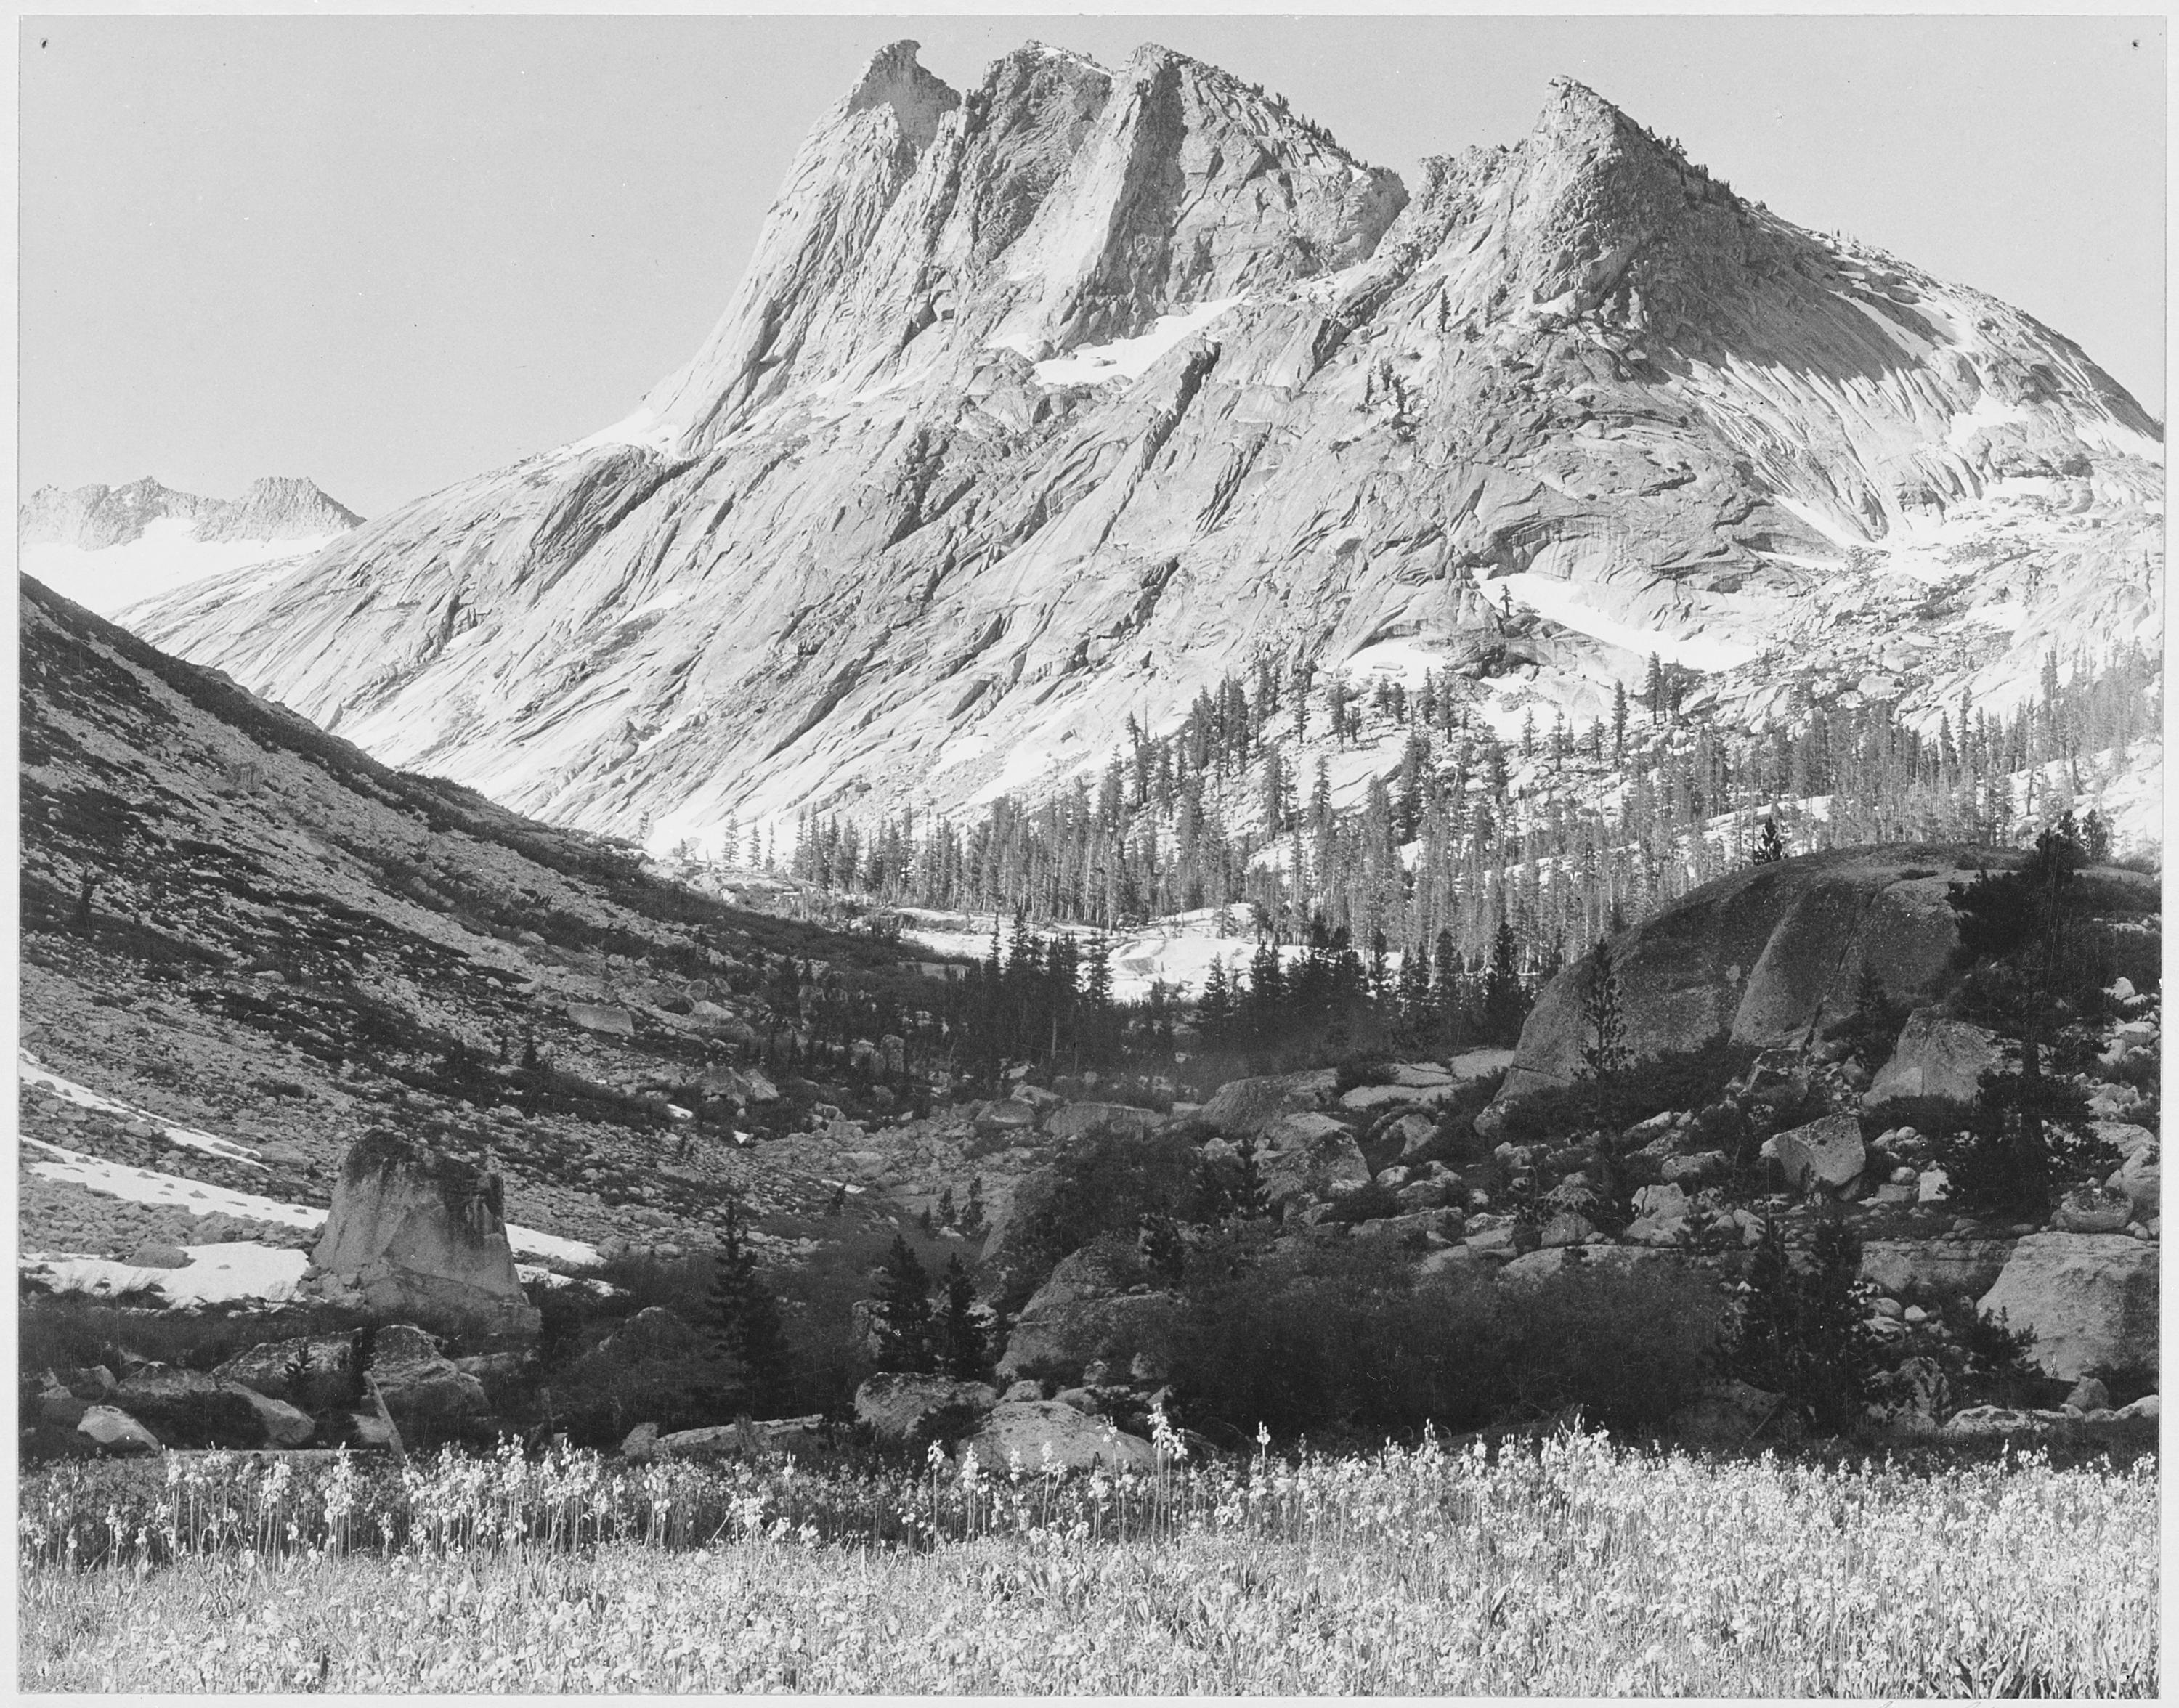 Ansel Adams - National Archives 79-AA-H25